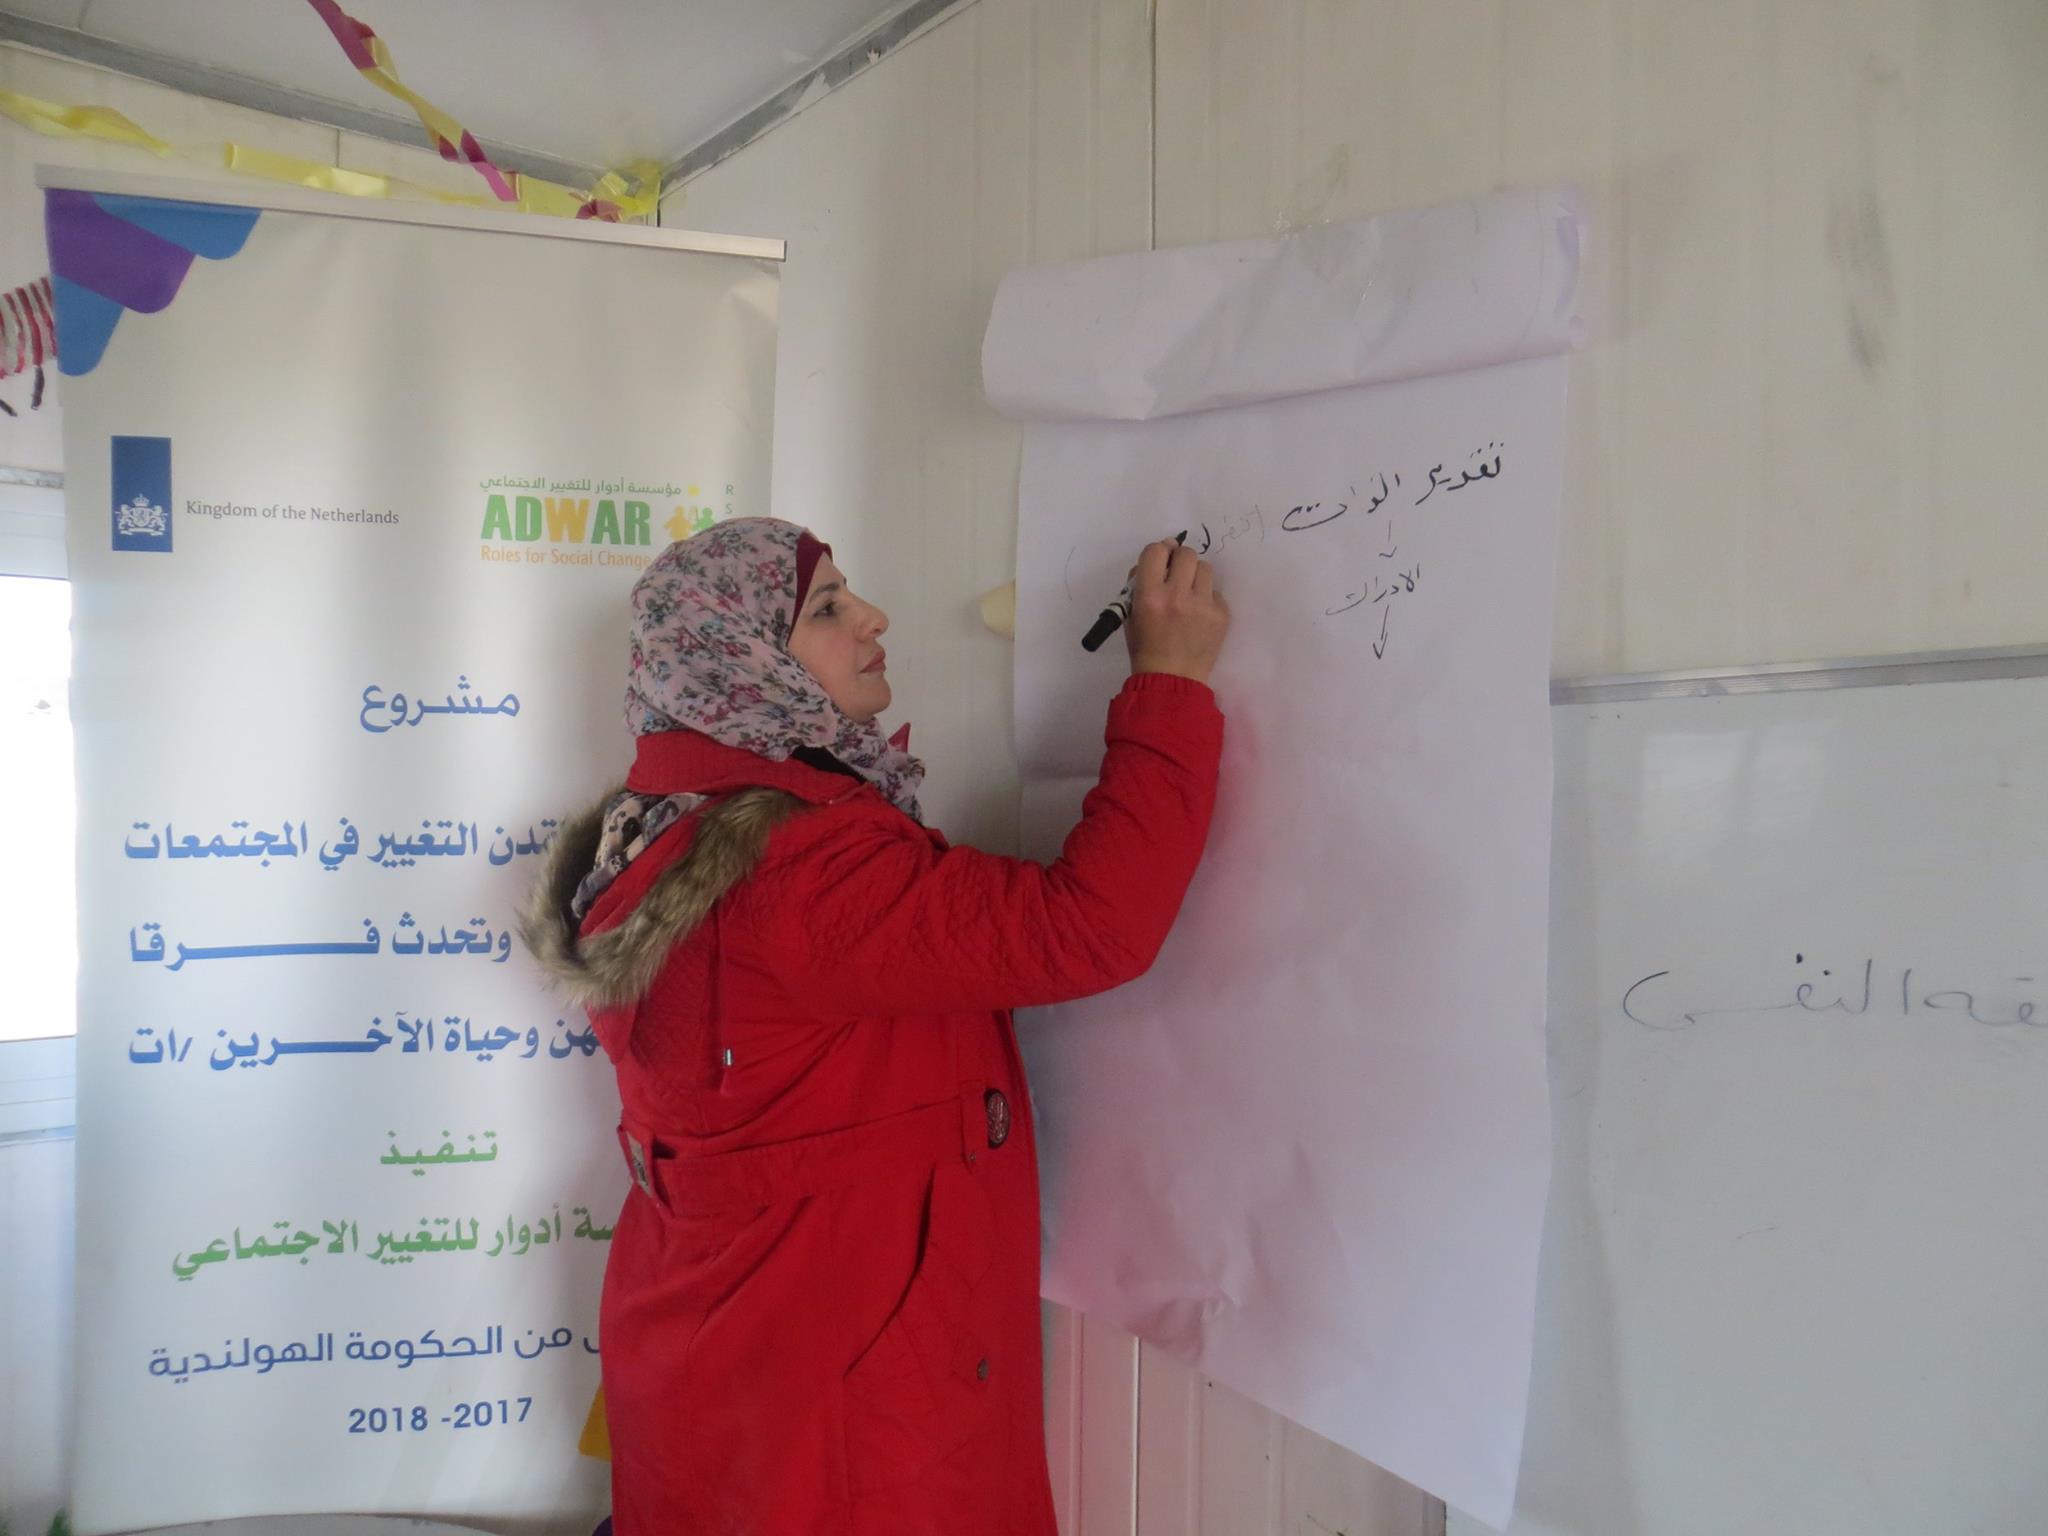  ADWAR continues implementing its capacity building program in Abu Nowar